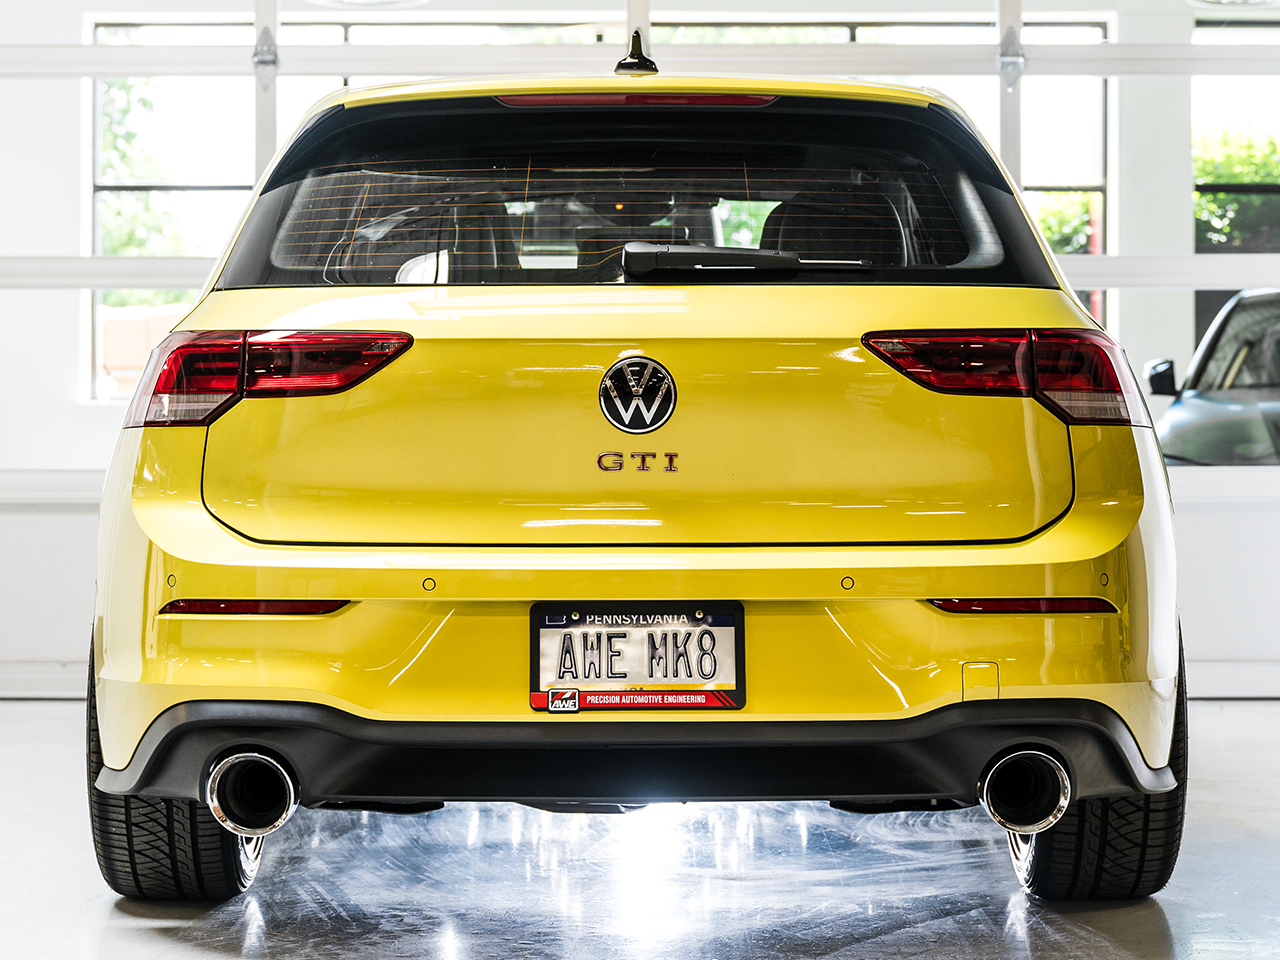 AWE EXHAUST SUITE FOR THE Volkswagen MK8 GTI - AWE